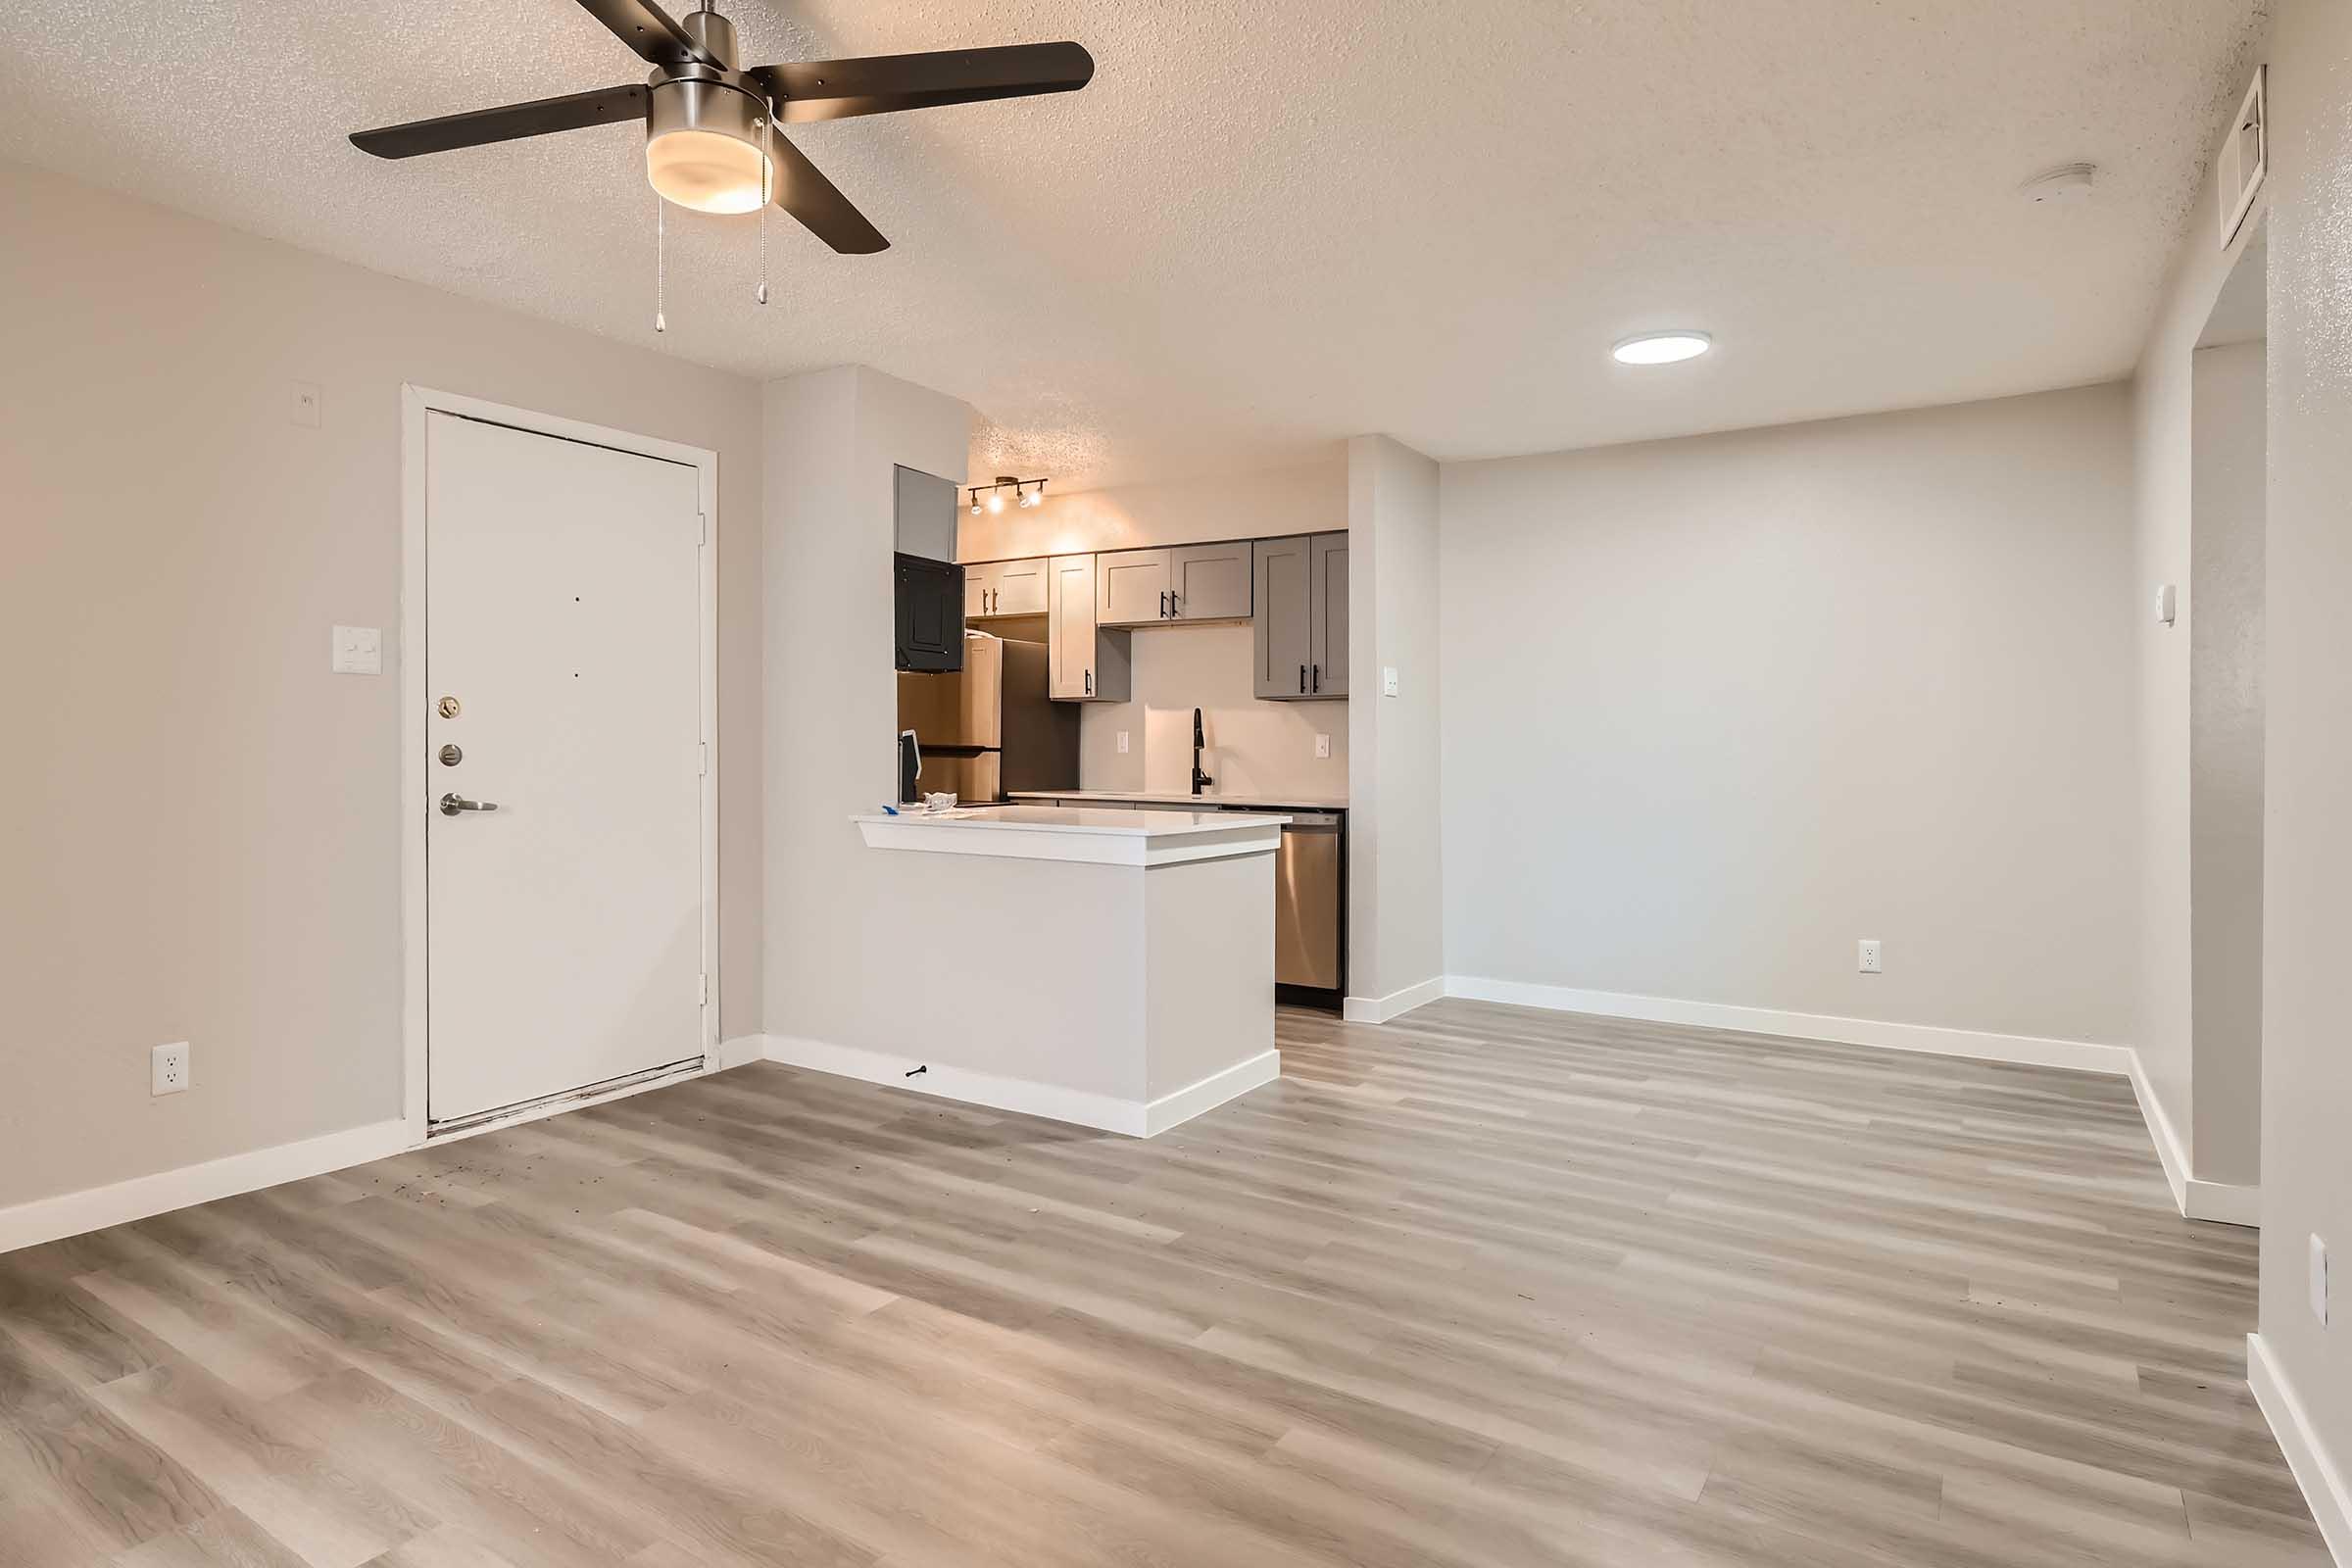 Rise North Arlington open-concept living room with a ceiling fan, wood-style flooring and a kitchen.